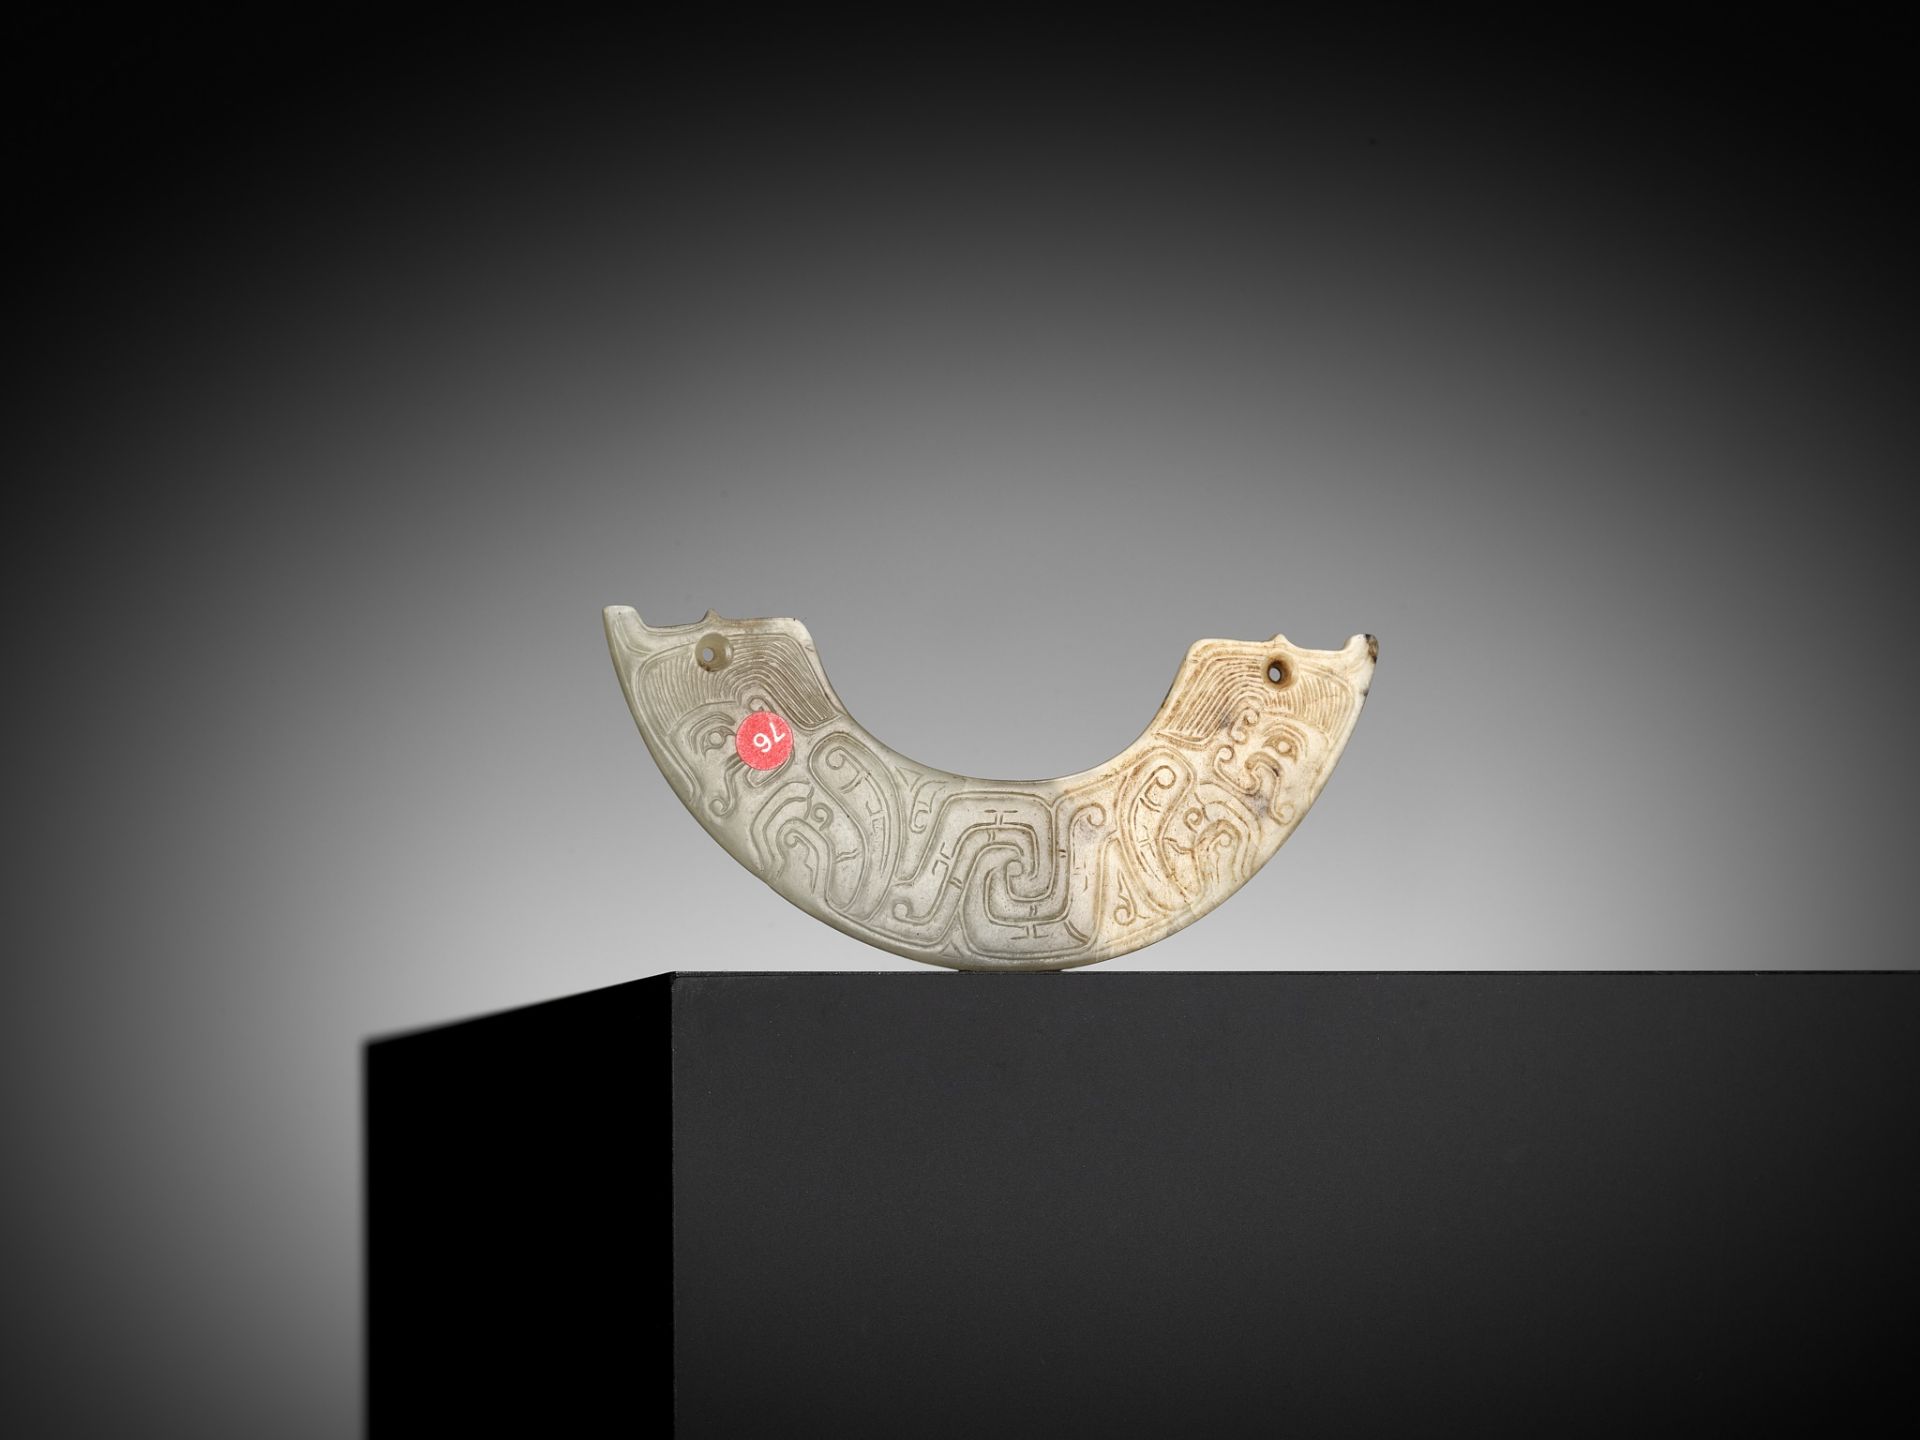 A SMALL PALE CELADON JADE 'HUMAN FIGURE' ORNAMENT, HUANG, WESTERN ZHOU DYNASTY - Image 5 of 11